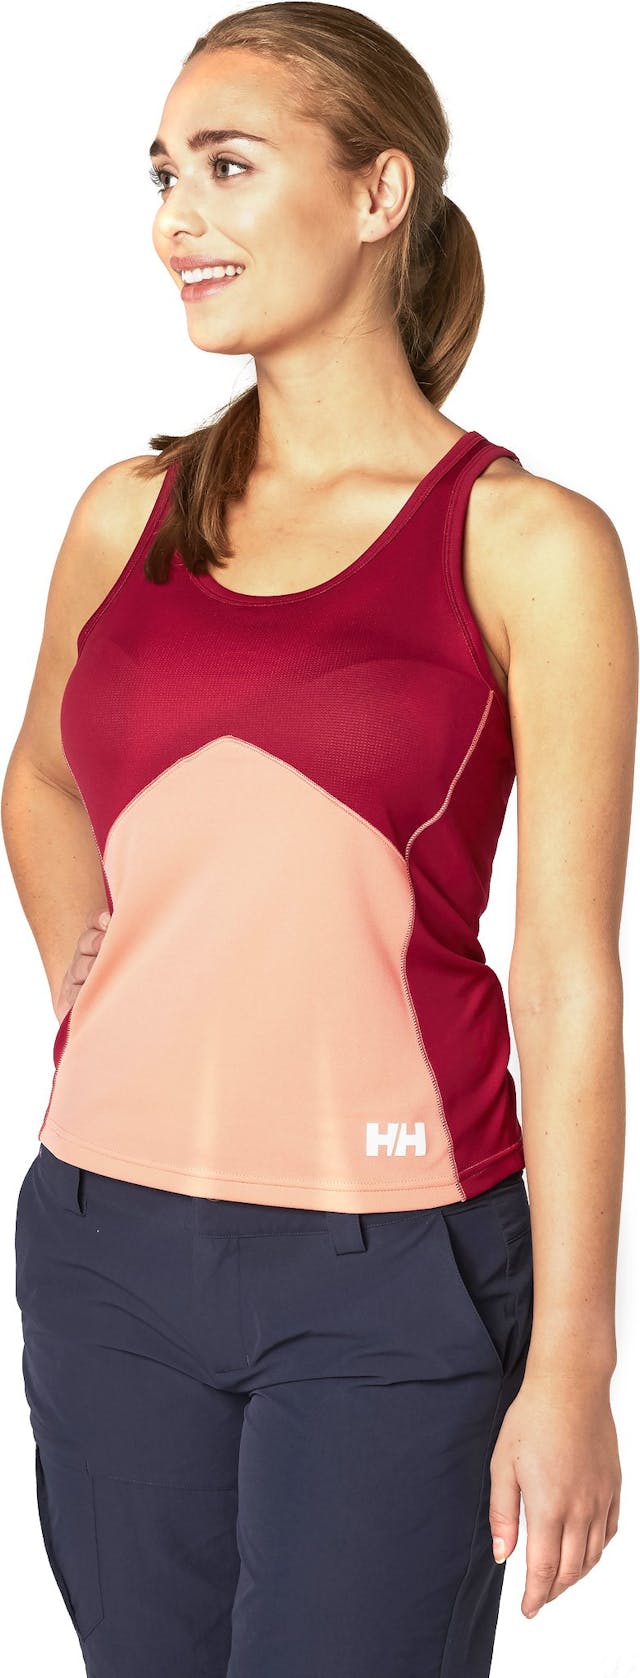 Product image for Hh Lifa Active Light Singlet - Women's